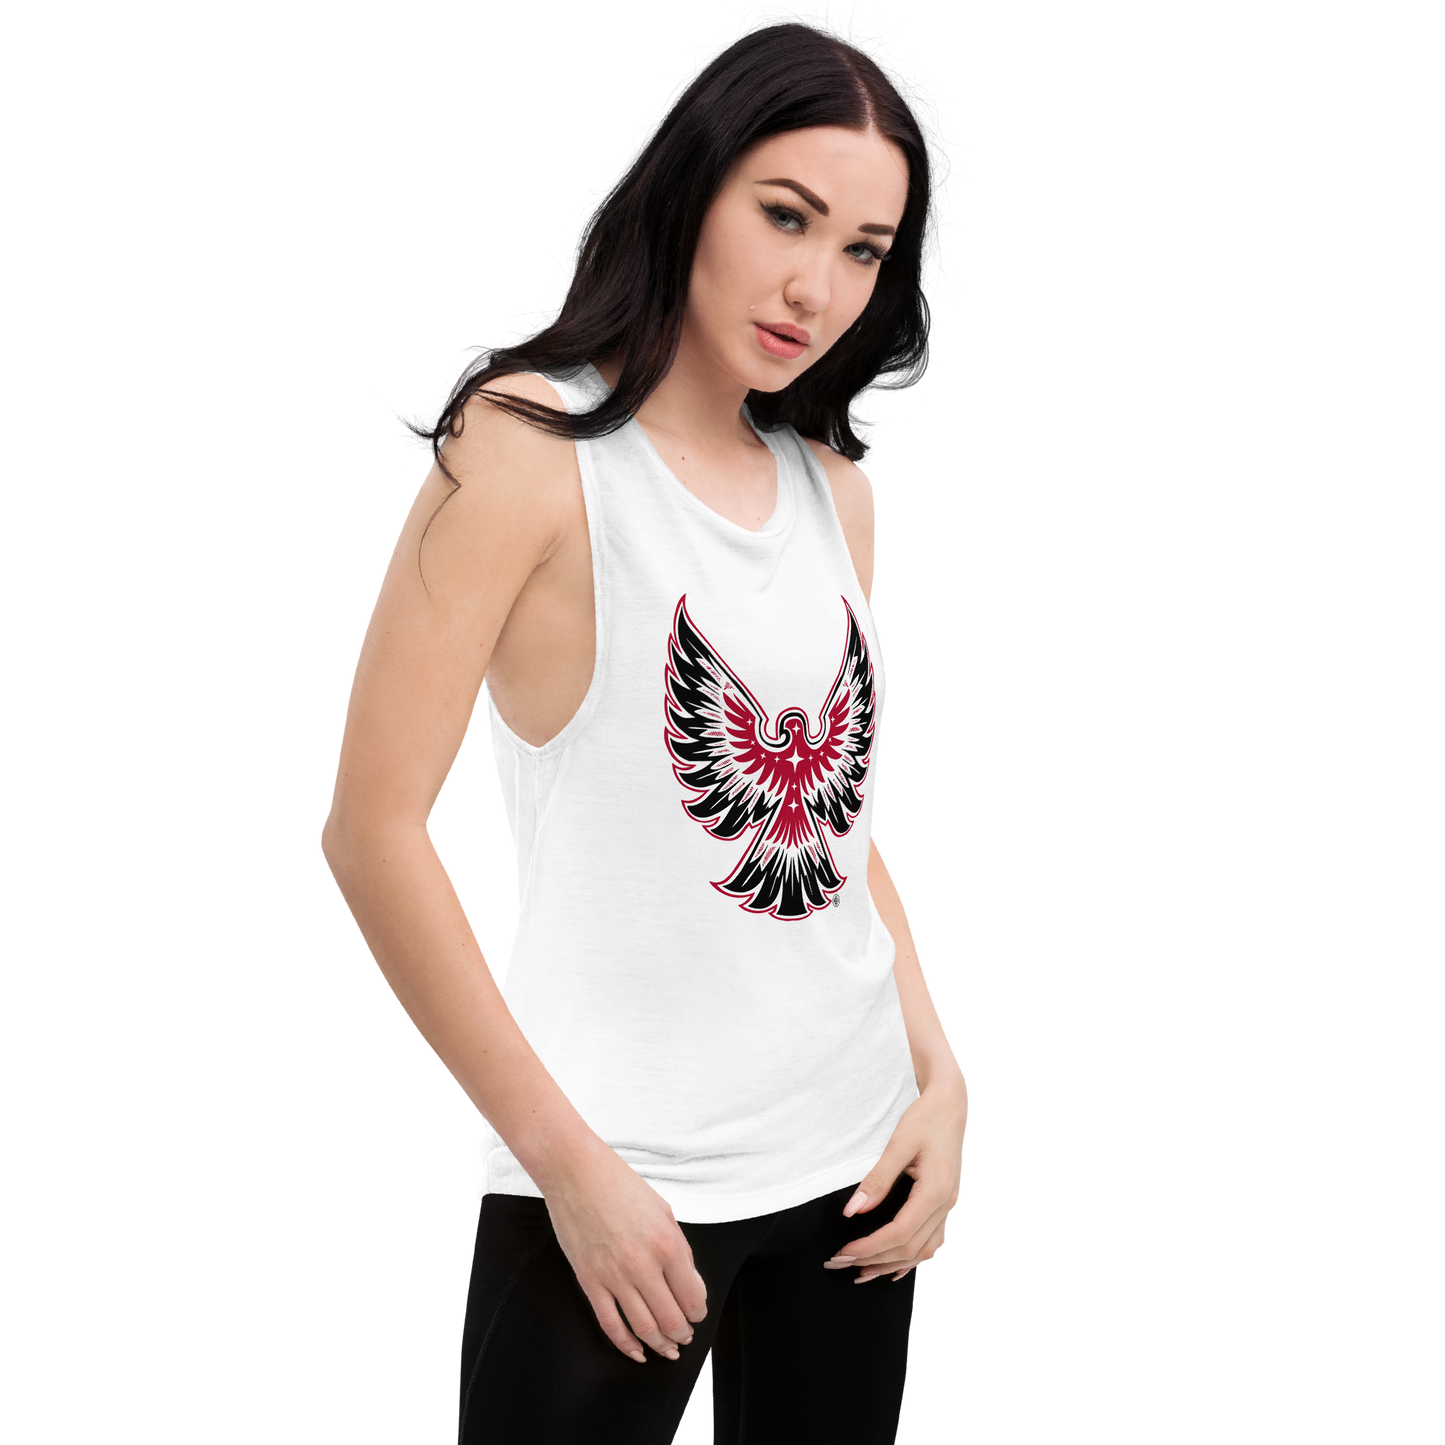 Women's Sleeveless T-Shirt ❯ Spread Your Wings ❯ Various Colors